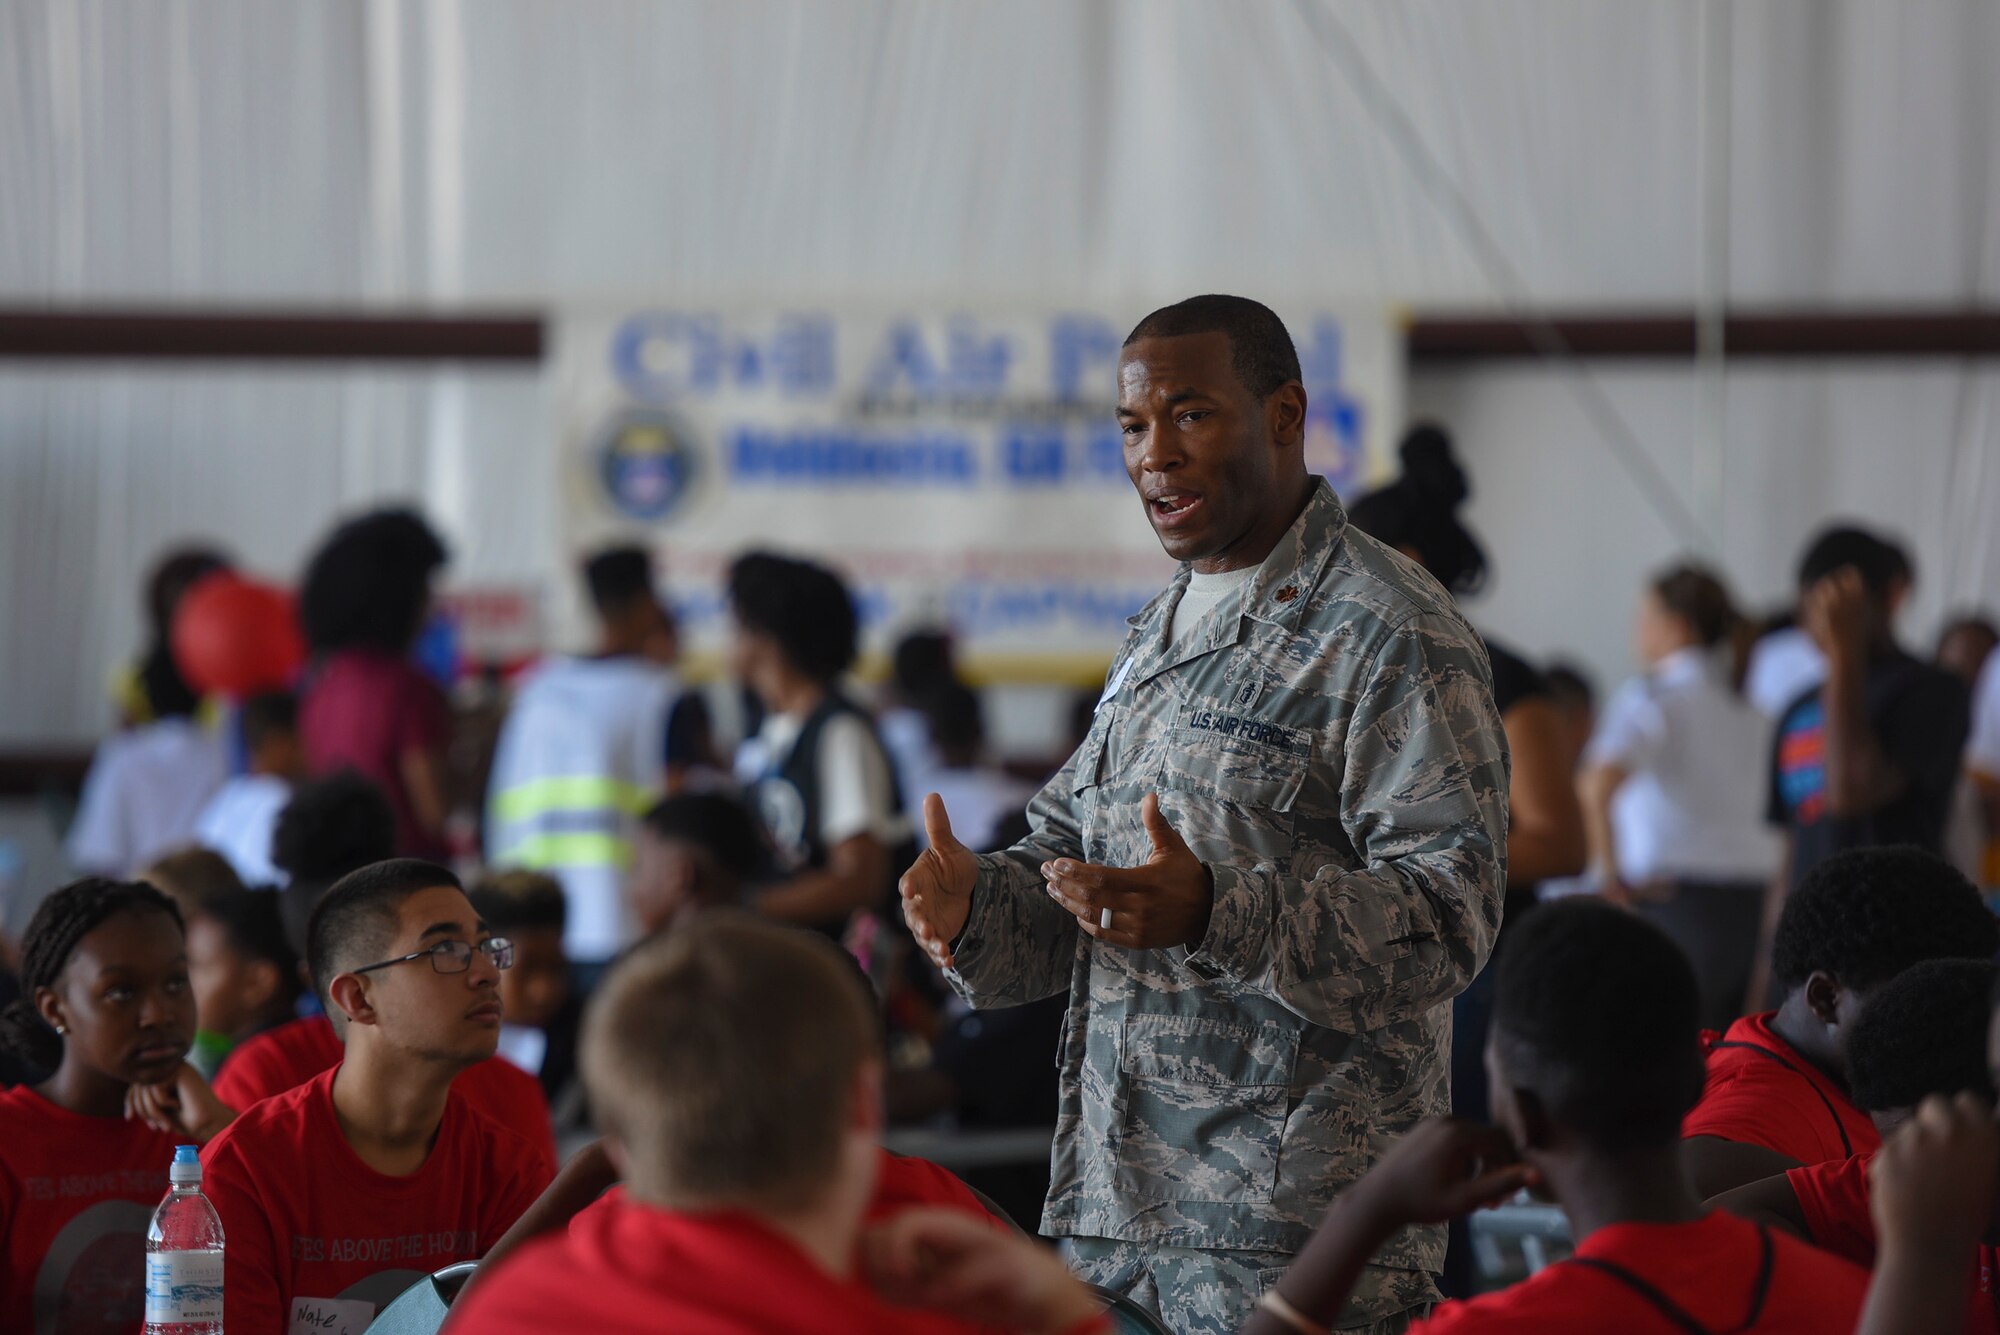 Maj. Sherrod Brown, 23d Aerospace Medicine Squadron Bioenvironmental Engineering commander, briefs the importance of Science, Technology, Engineering and Mathematical academic enrichment to youth during the Eyes Above the Horizon diversity outreach program, July 22, 2017, in Valdosta, Ga. The Valdosta Regional Airport welcomed approximately 100 10-19-year-olds as they took the Valdosta skies to commemorate the 76th Anniversary of the historic Tuskegee Airmen. The program focuses on mentoring and familiarizing underrepresented minorities with basic flying fundamentals. (U.S. Air Force photo by Senior Airman Greg Nash) 